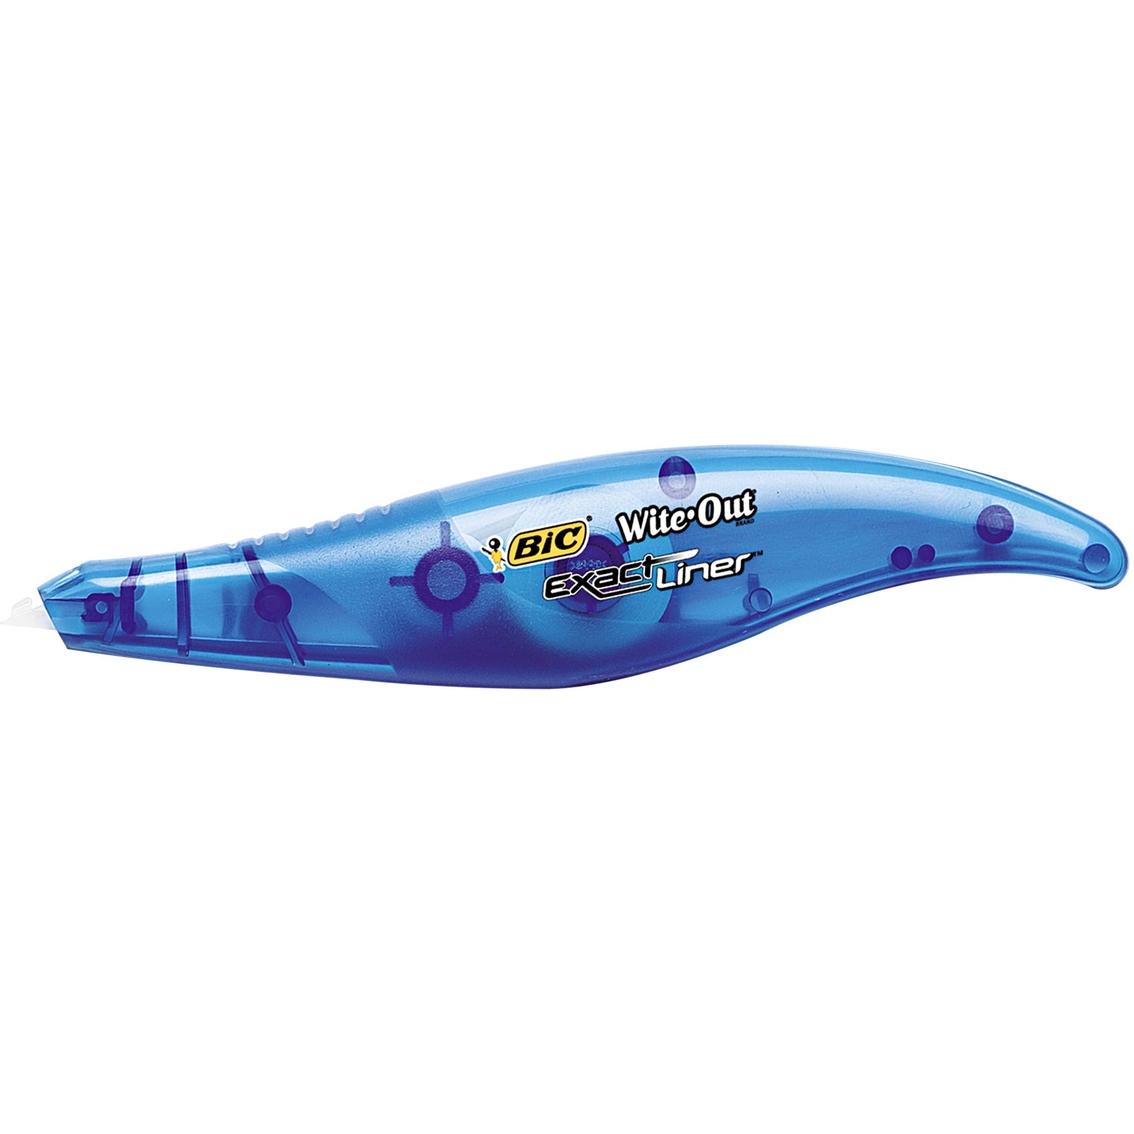 BIC Wite Out Exact Liner Correction Tape Pen - Image 2 of 2